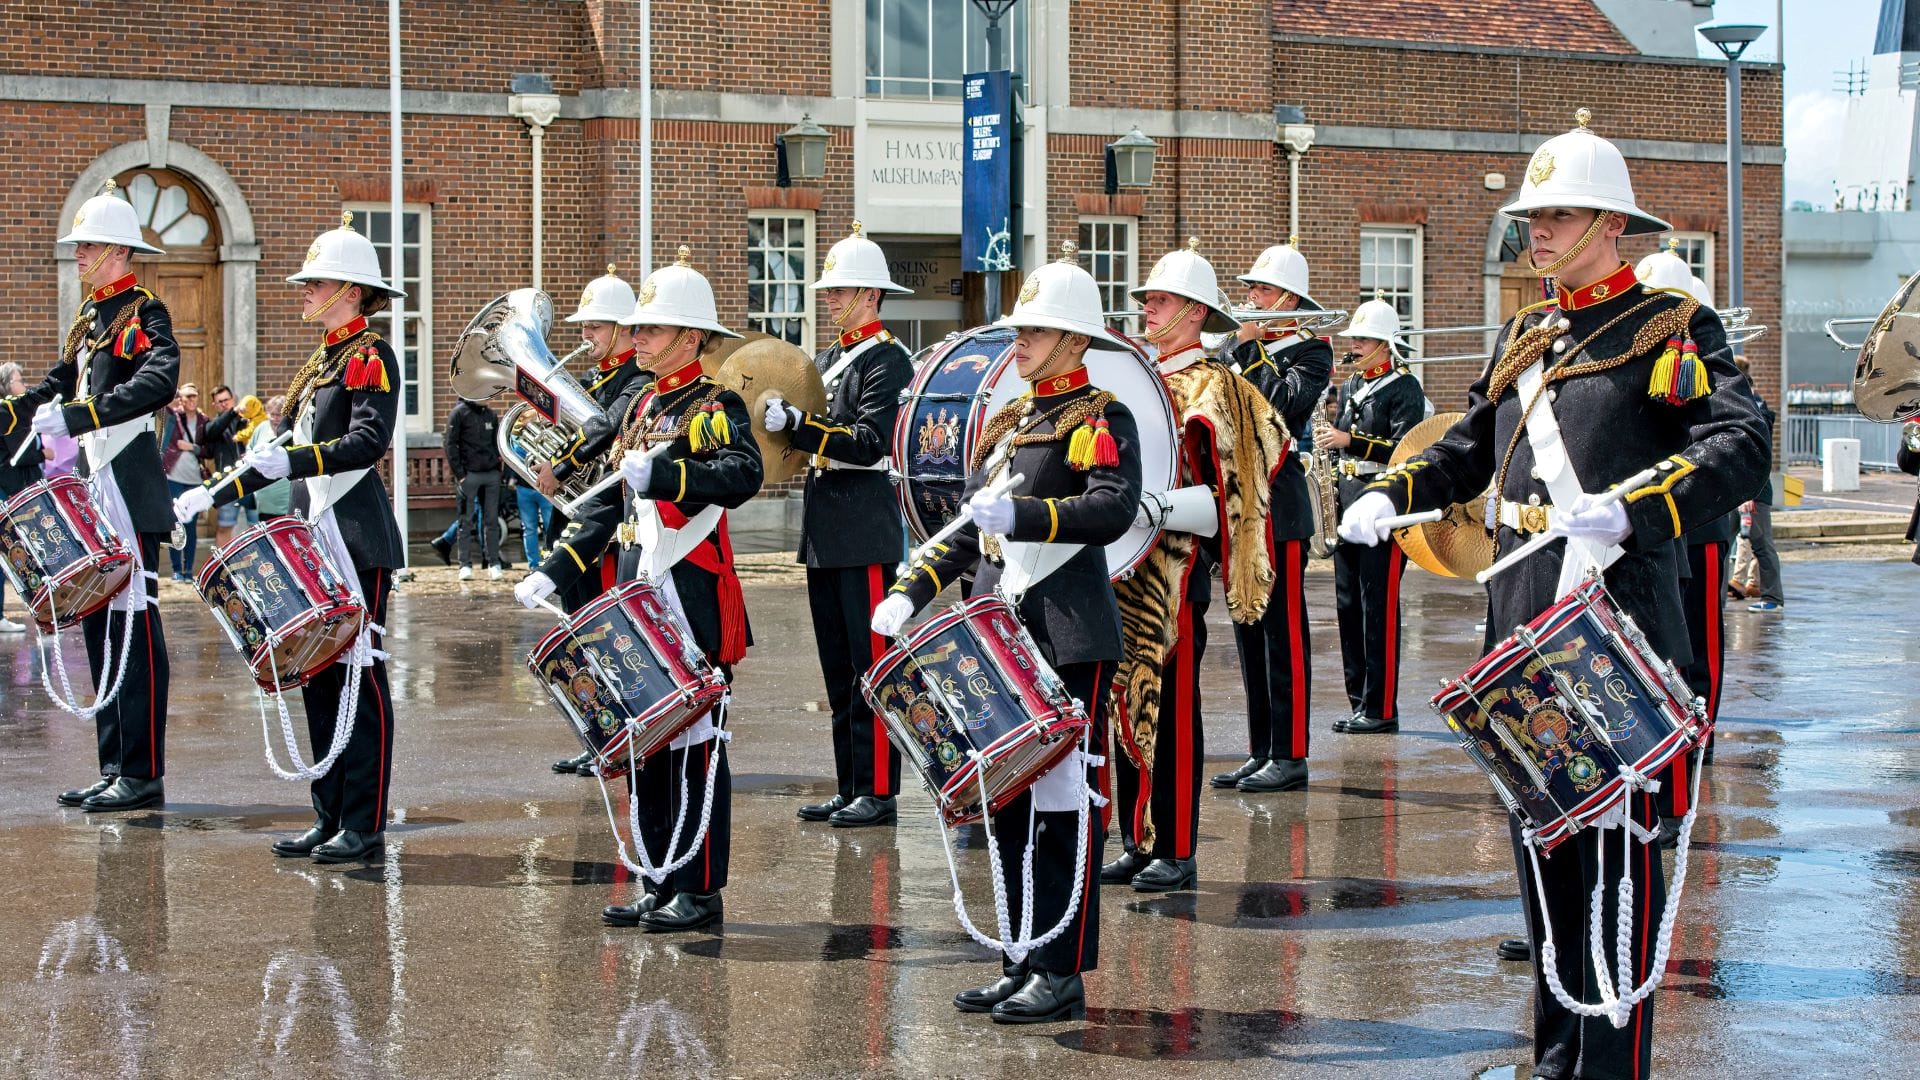 Royal Marines Band play outside HMS Victory Gallery at Portsmouth Historic Dockyard